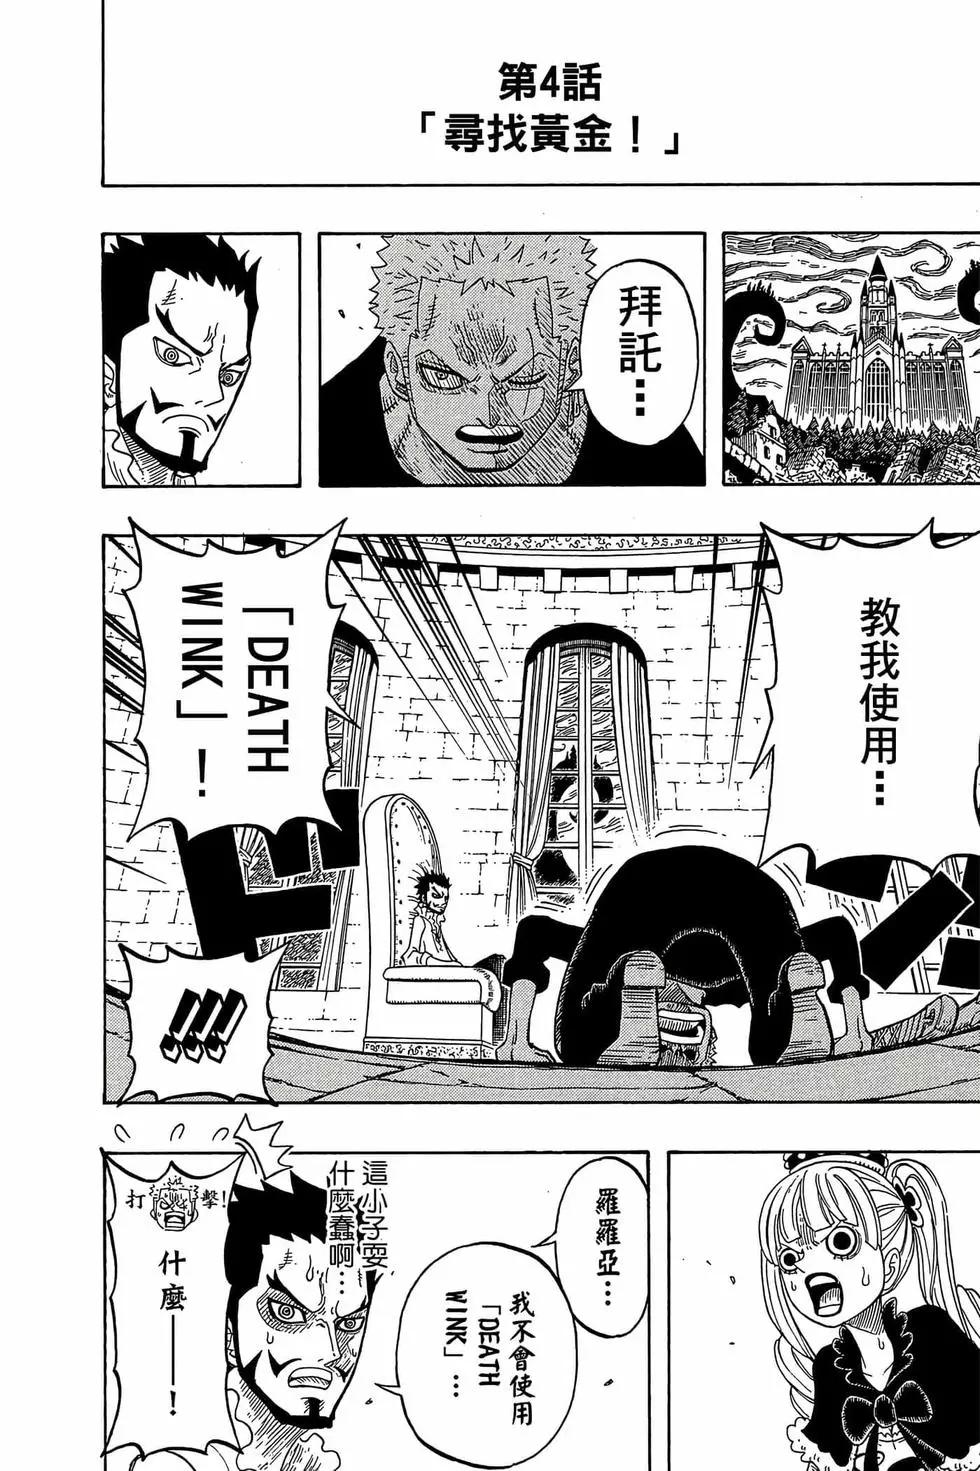 One piece party - 第01卷(3/4) - 1